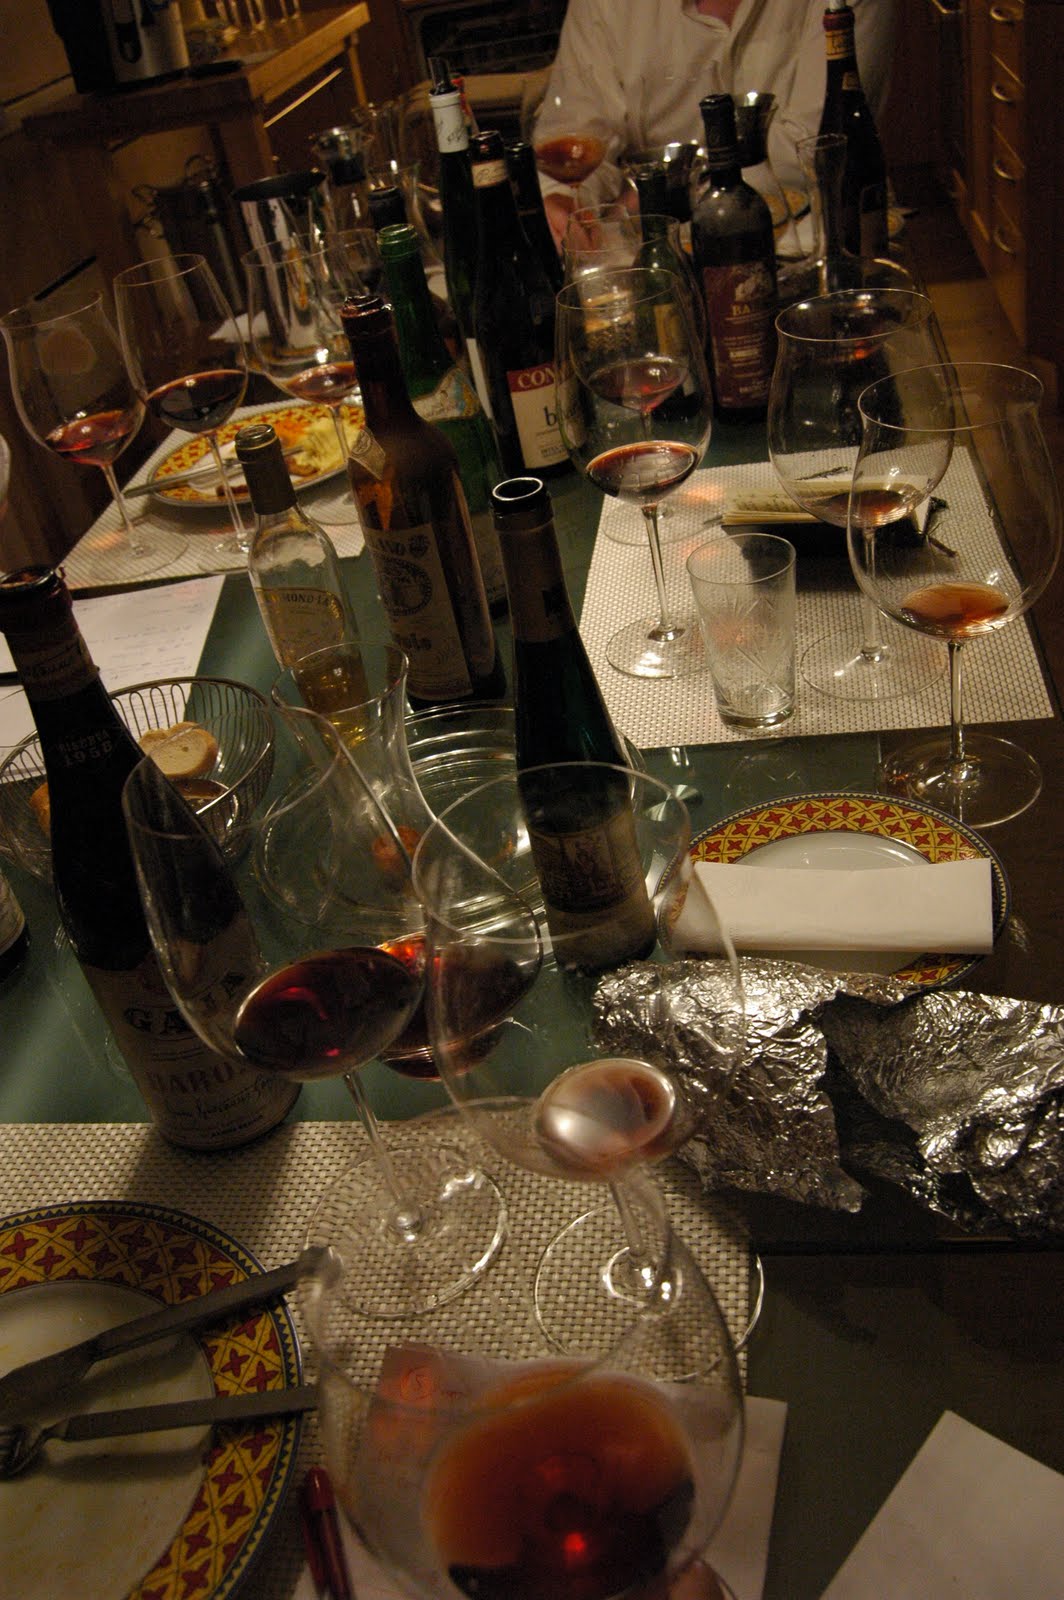 my wines and more: March 2010